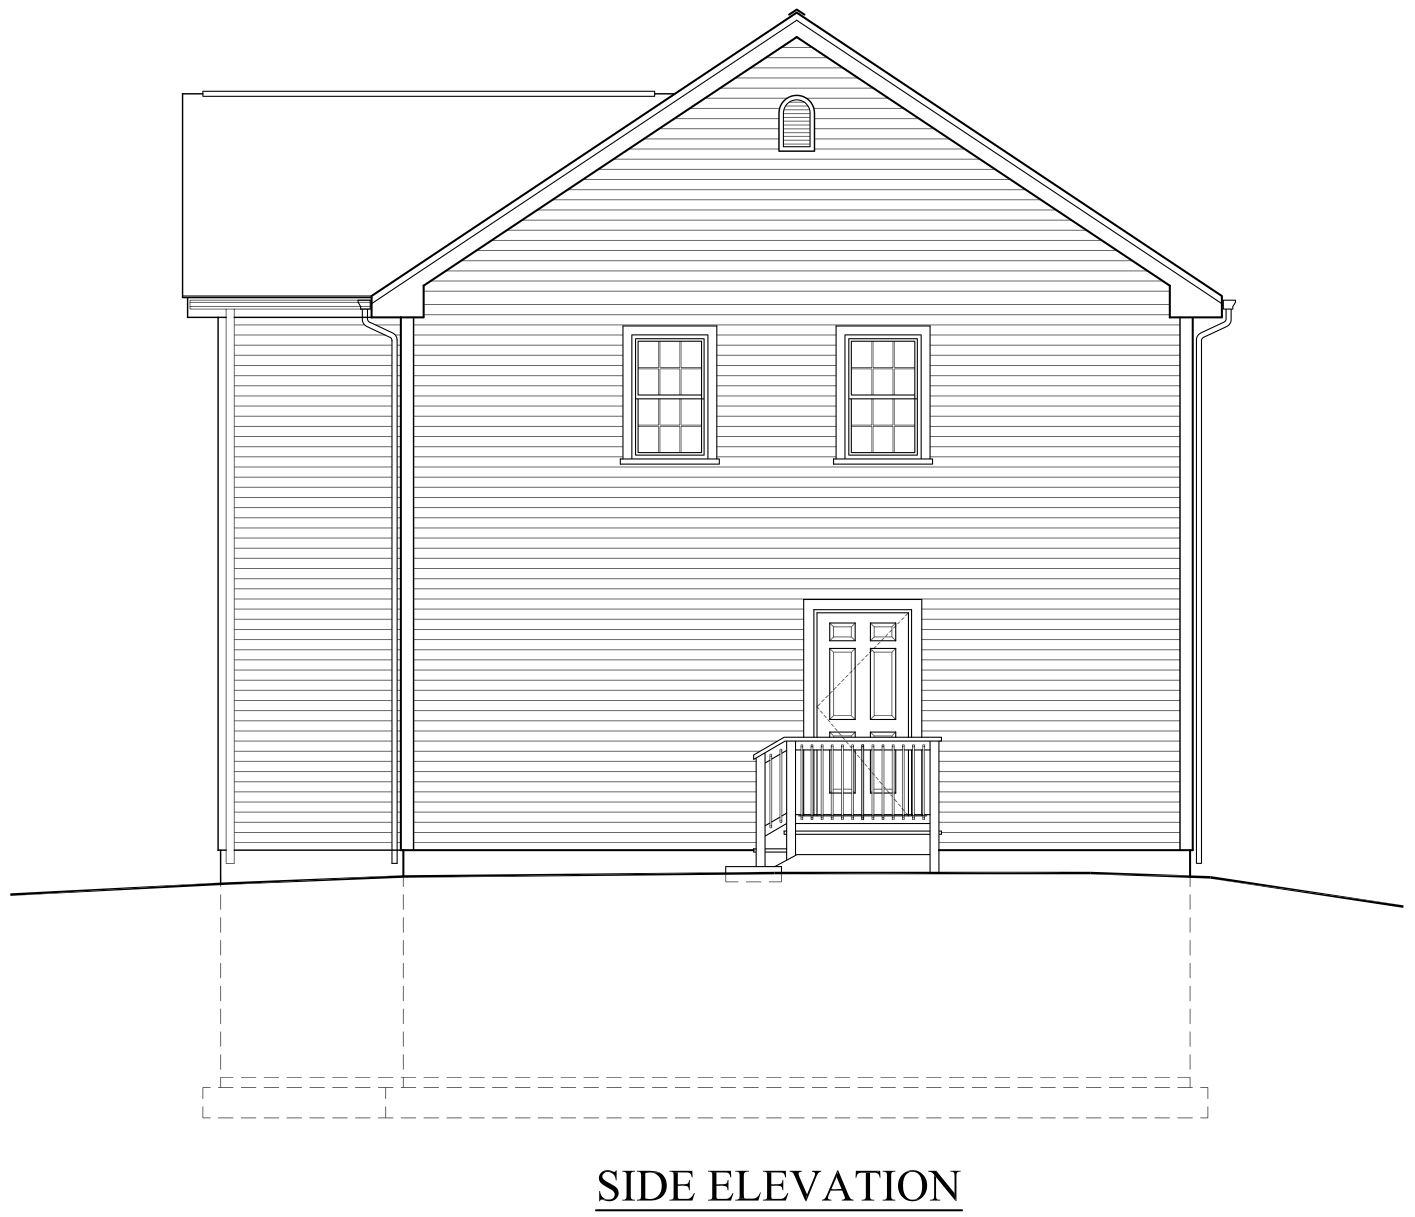 Building Elevation Drawing at GetDrawings Free download